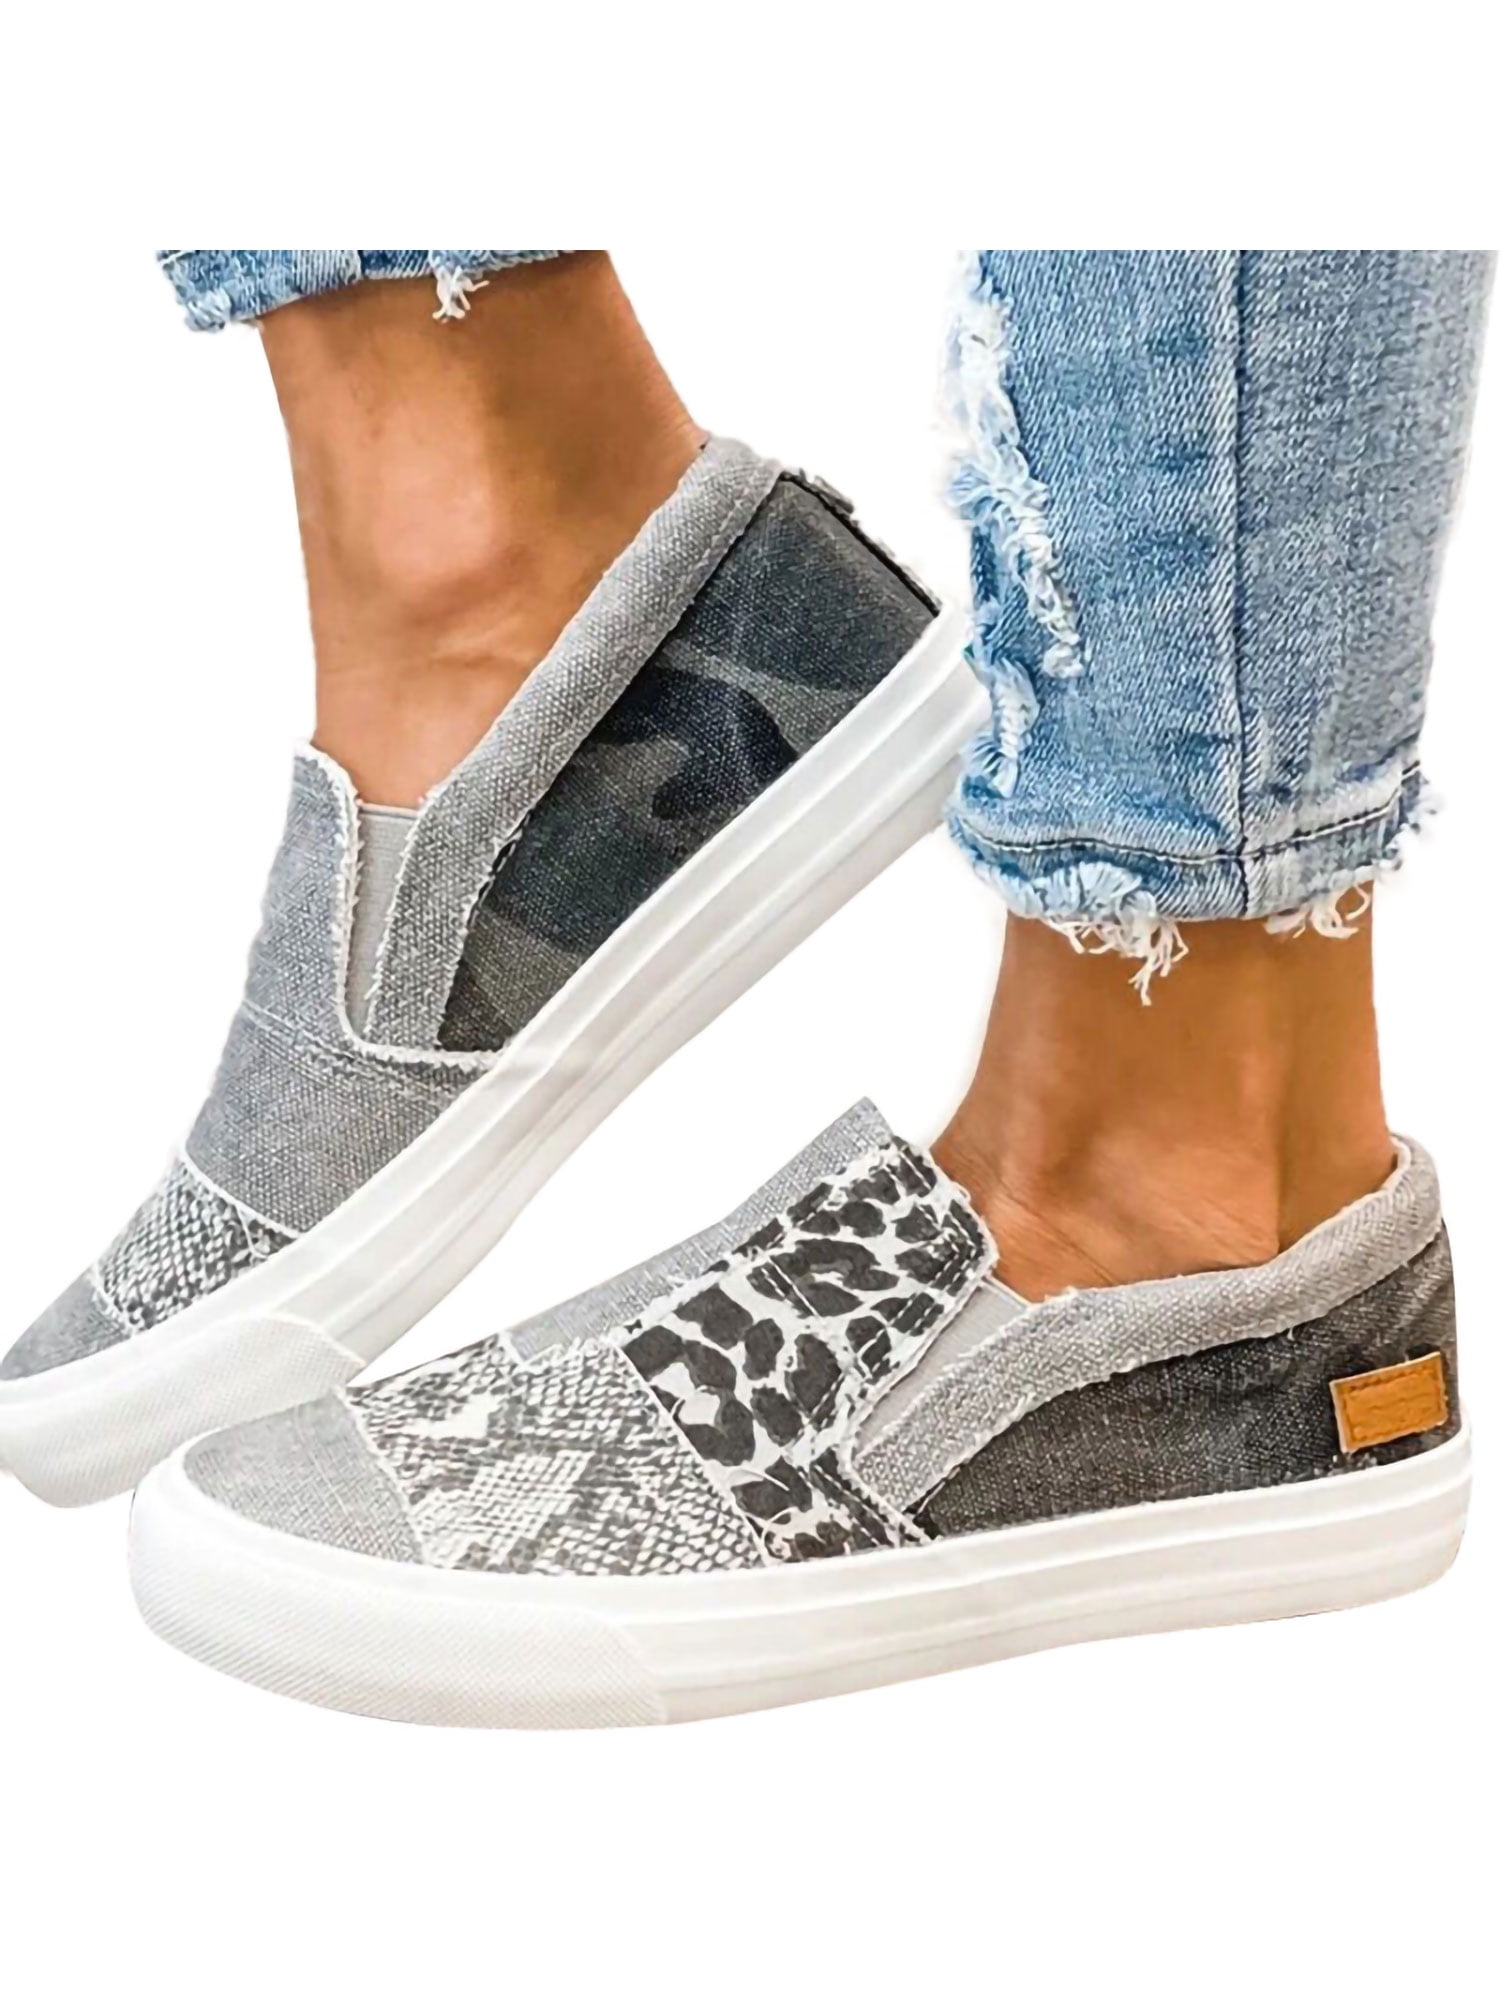 Women's Casual Glitter Sneakers Loafers Slip On Casual Sport Canvas Comfort Shoe